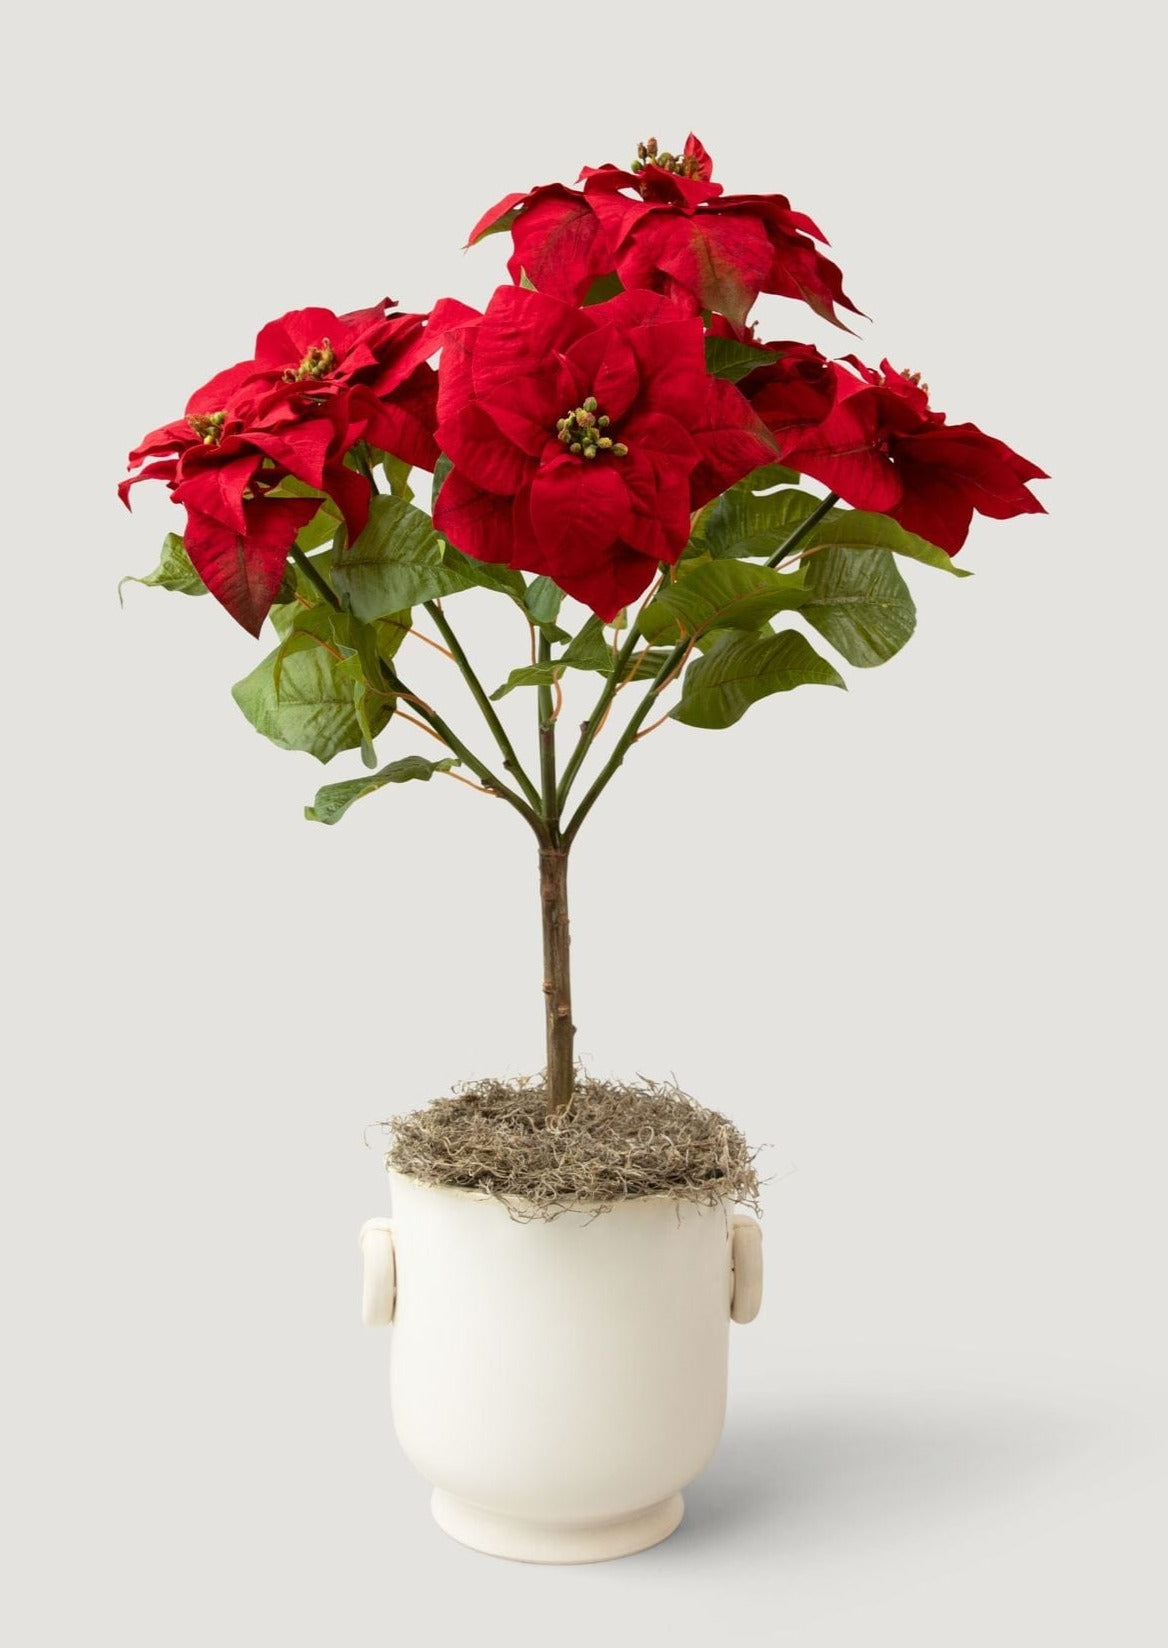 Artificial Red Poinsettia Plant in Pot with Spanish Moss